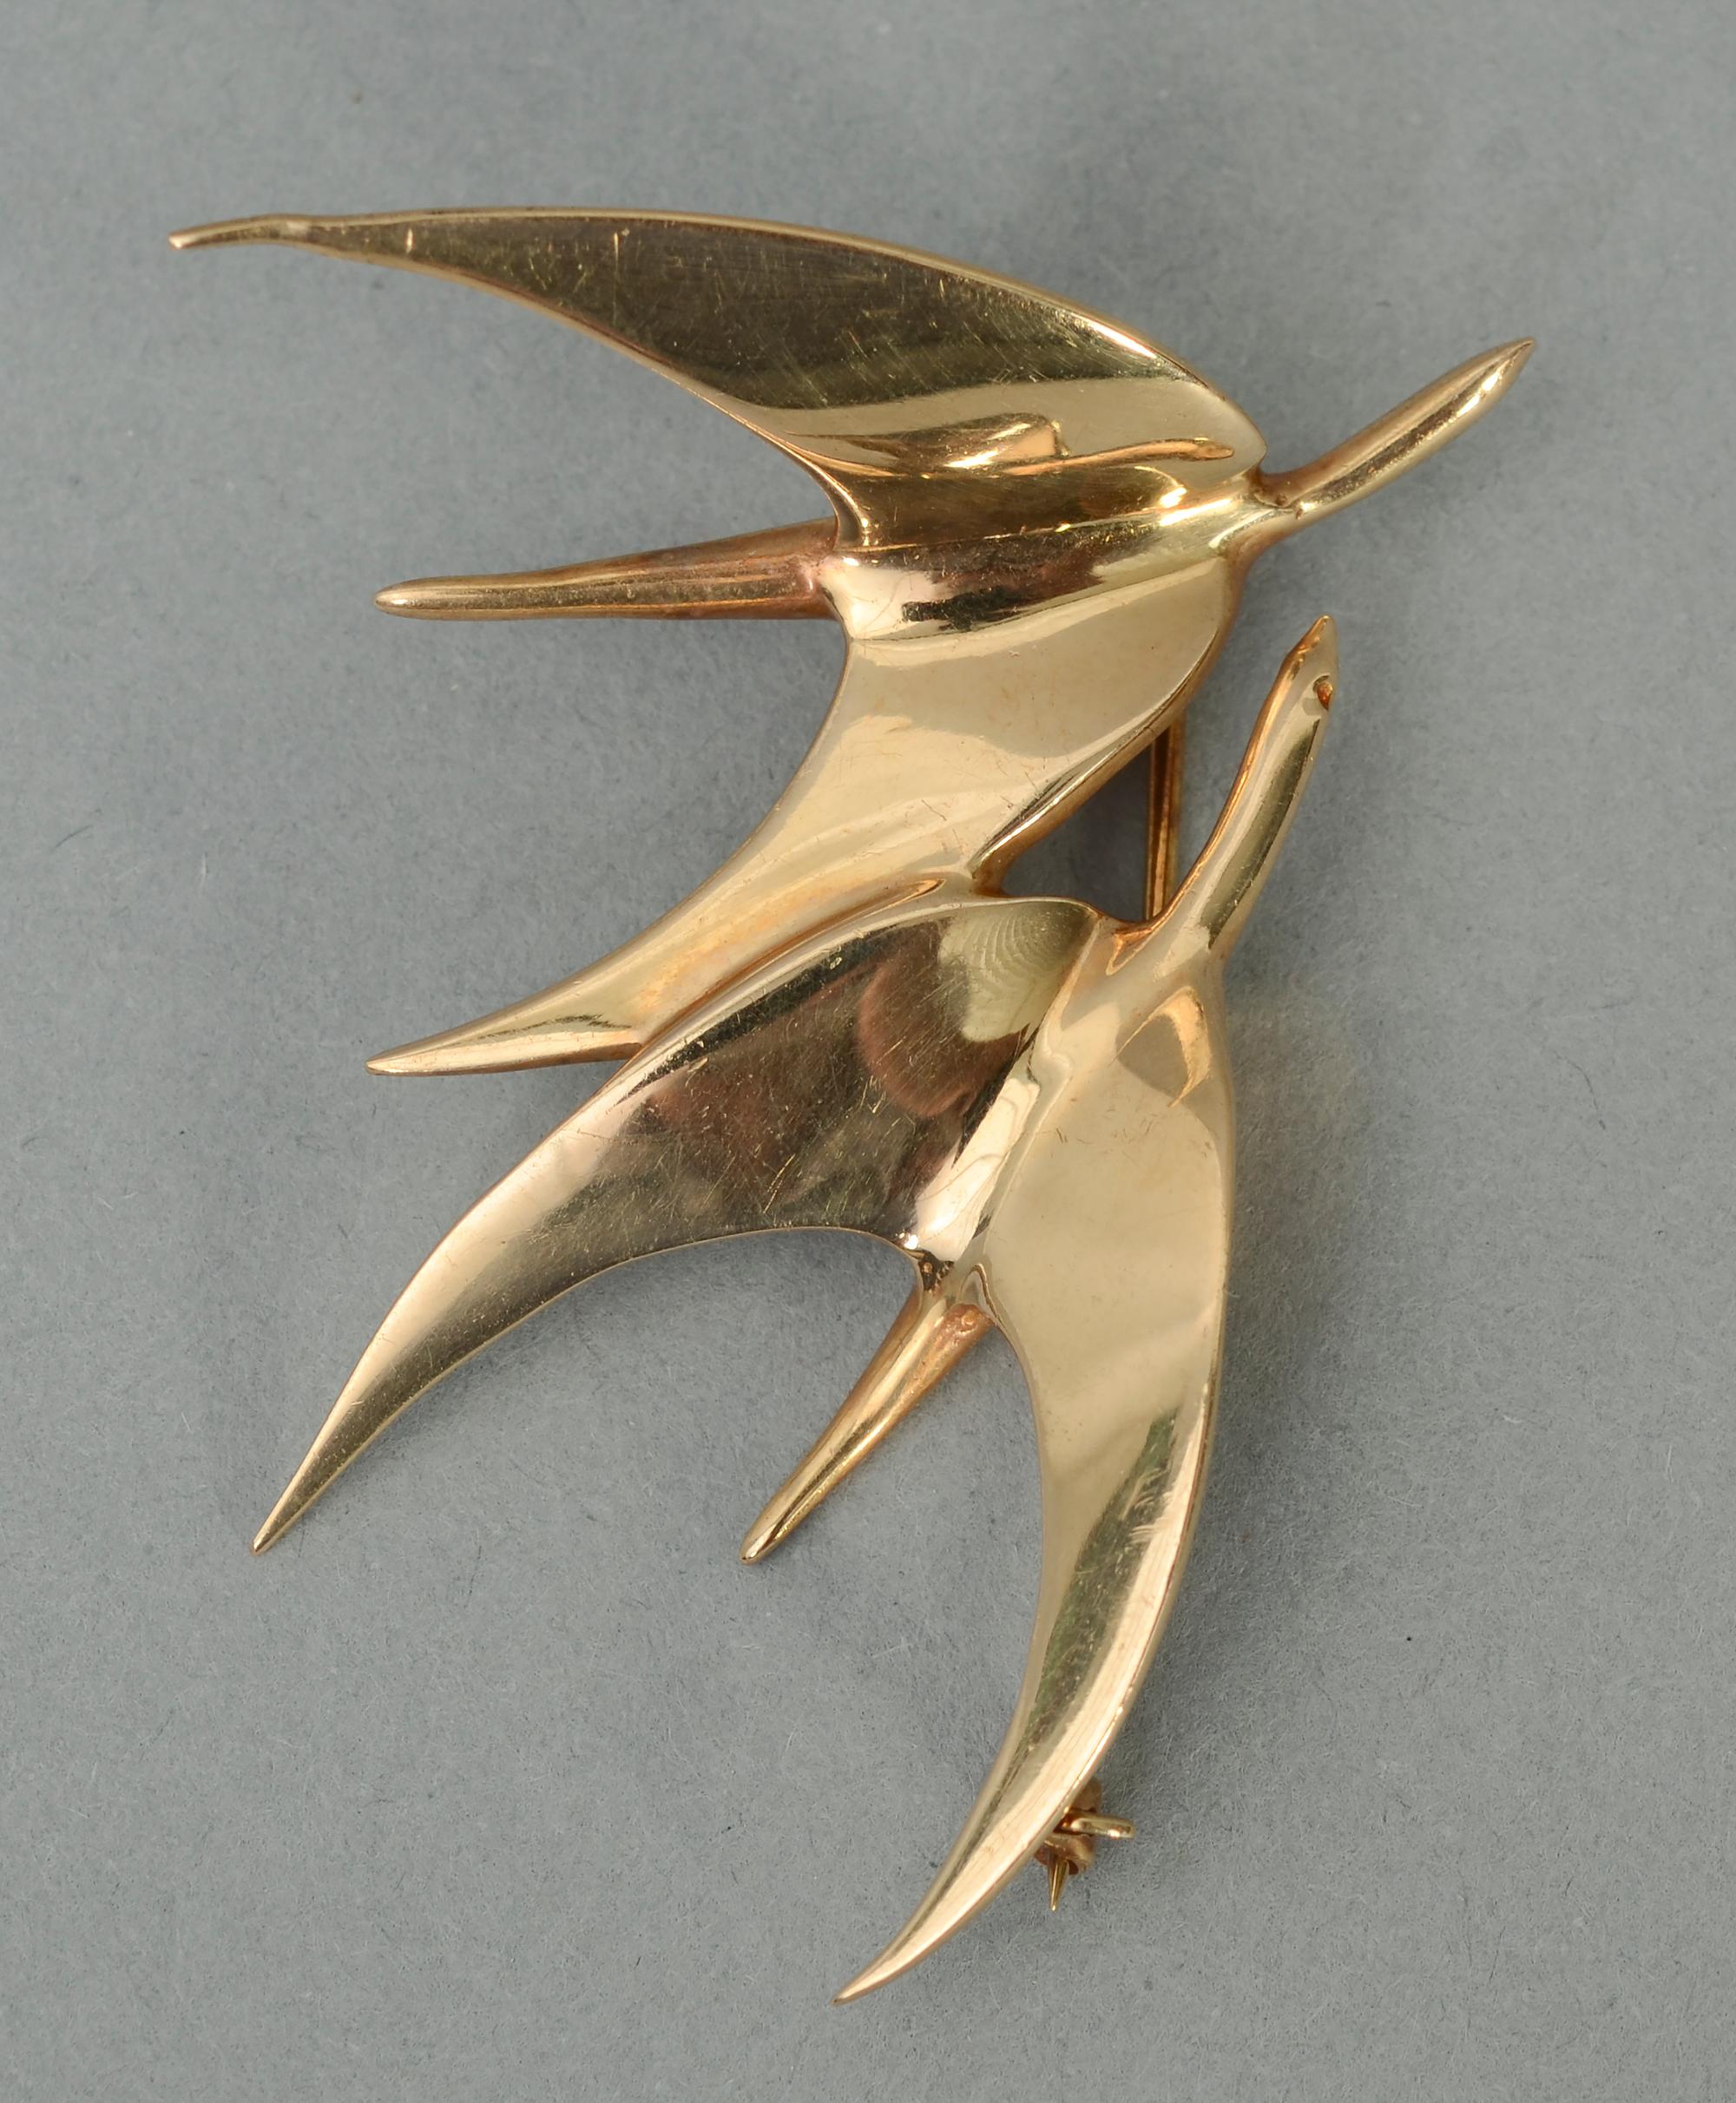 This Tiffany brooch depicting two birds in flight is the ultimate in Modernist abstraction and minimalism. Streamlined as it is, it very effectively conveys the movement of the pair.
The brooch is 2 1/4 inches in width and 2 1/8 inches tall. It can